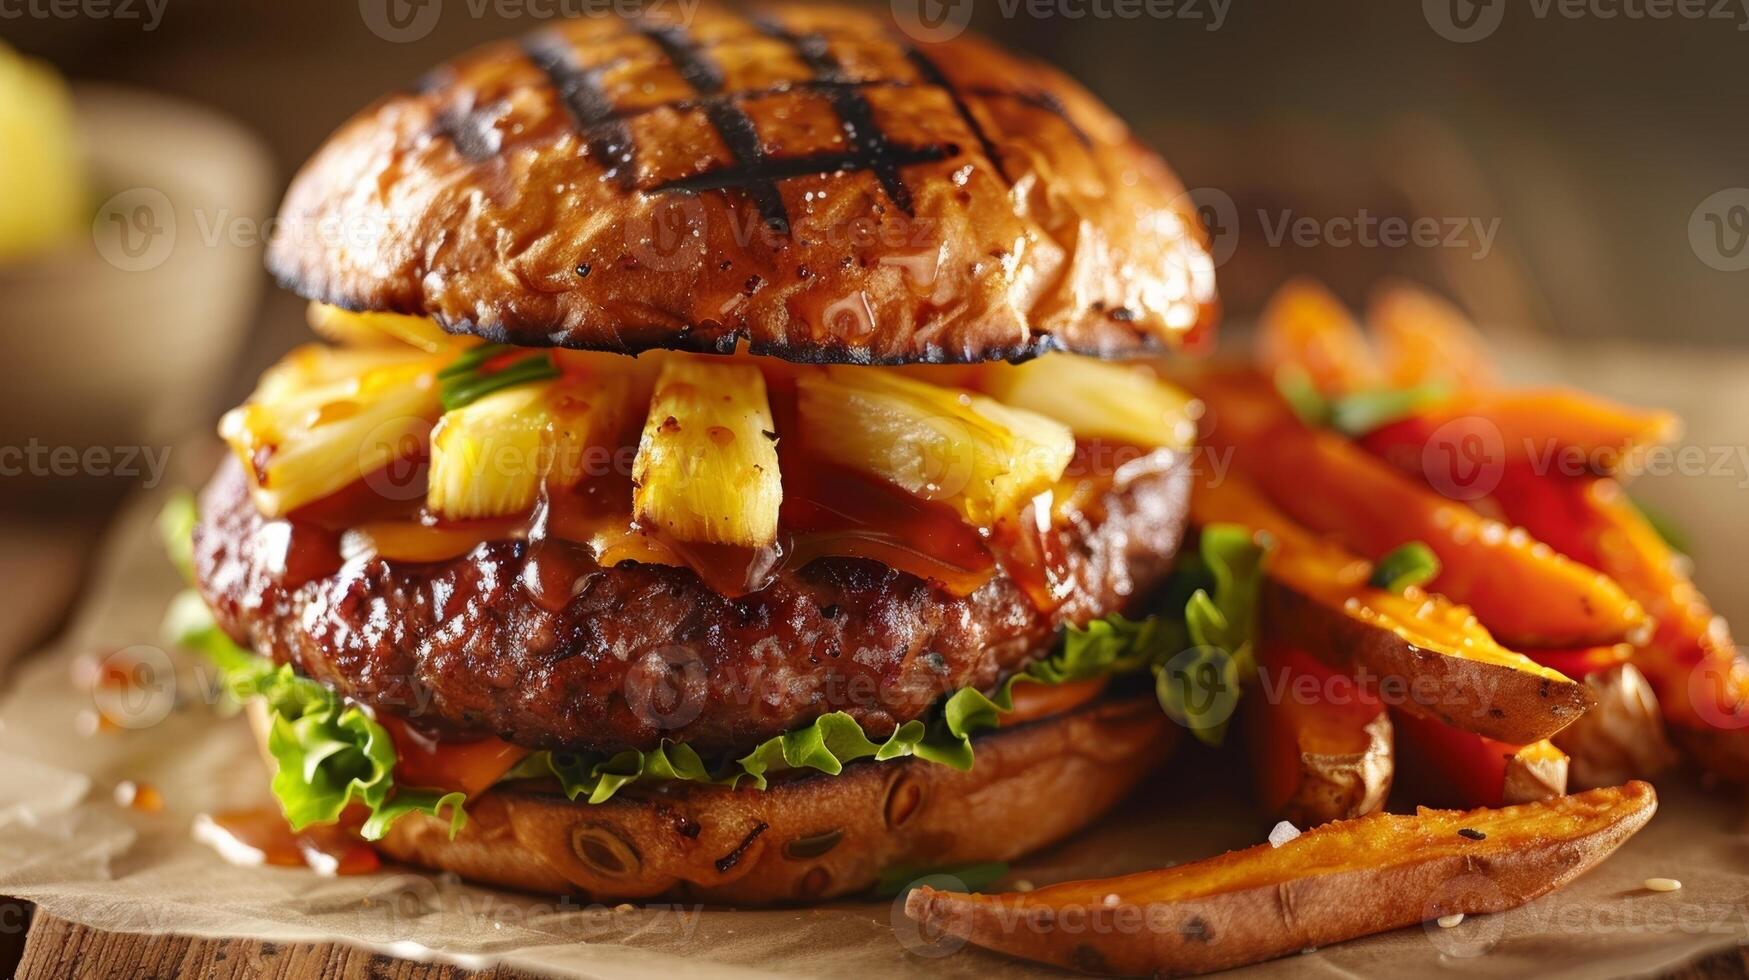 A gourmet burger featuring a pineapple and teriyaki glaze on a juicy beef patty served with a side of sweet potato fries photo